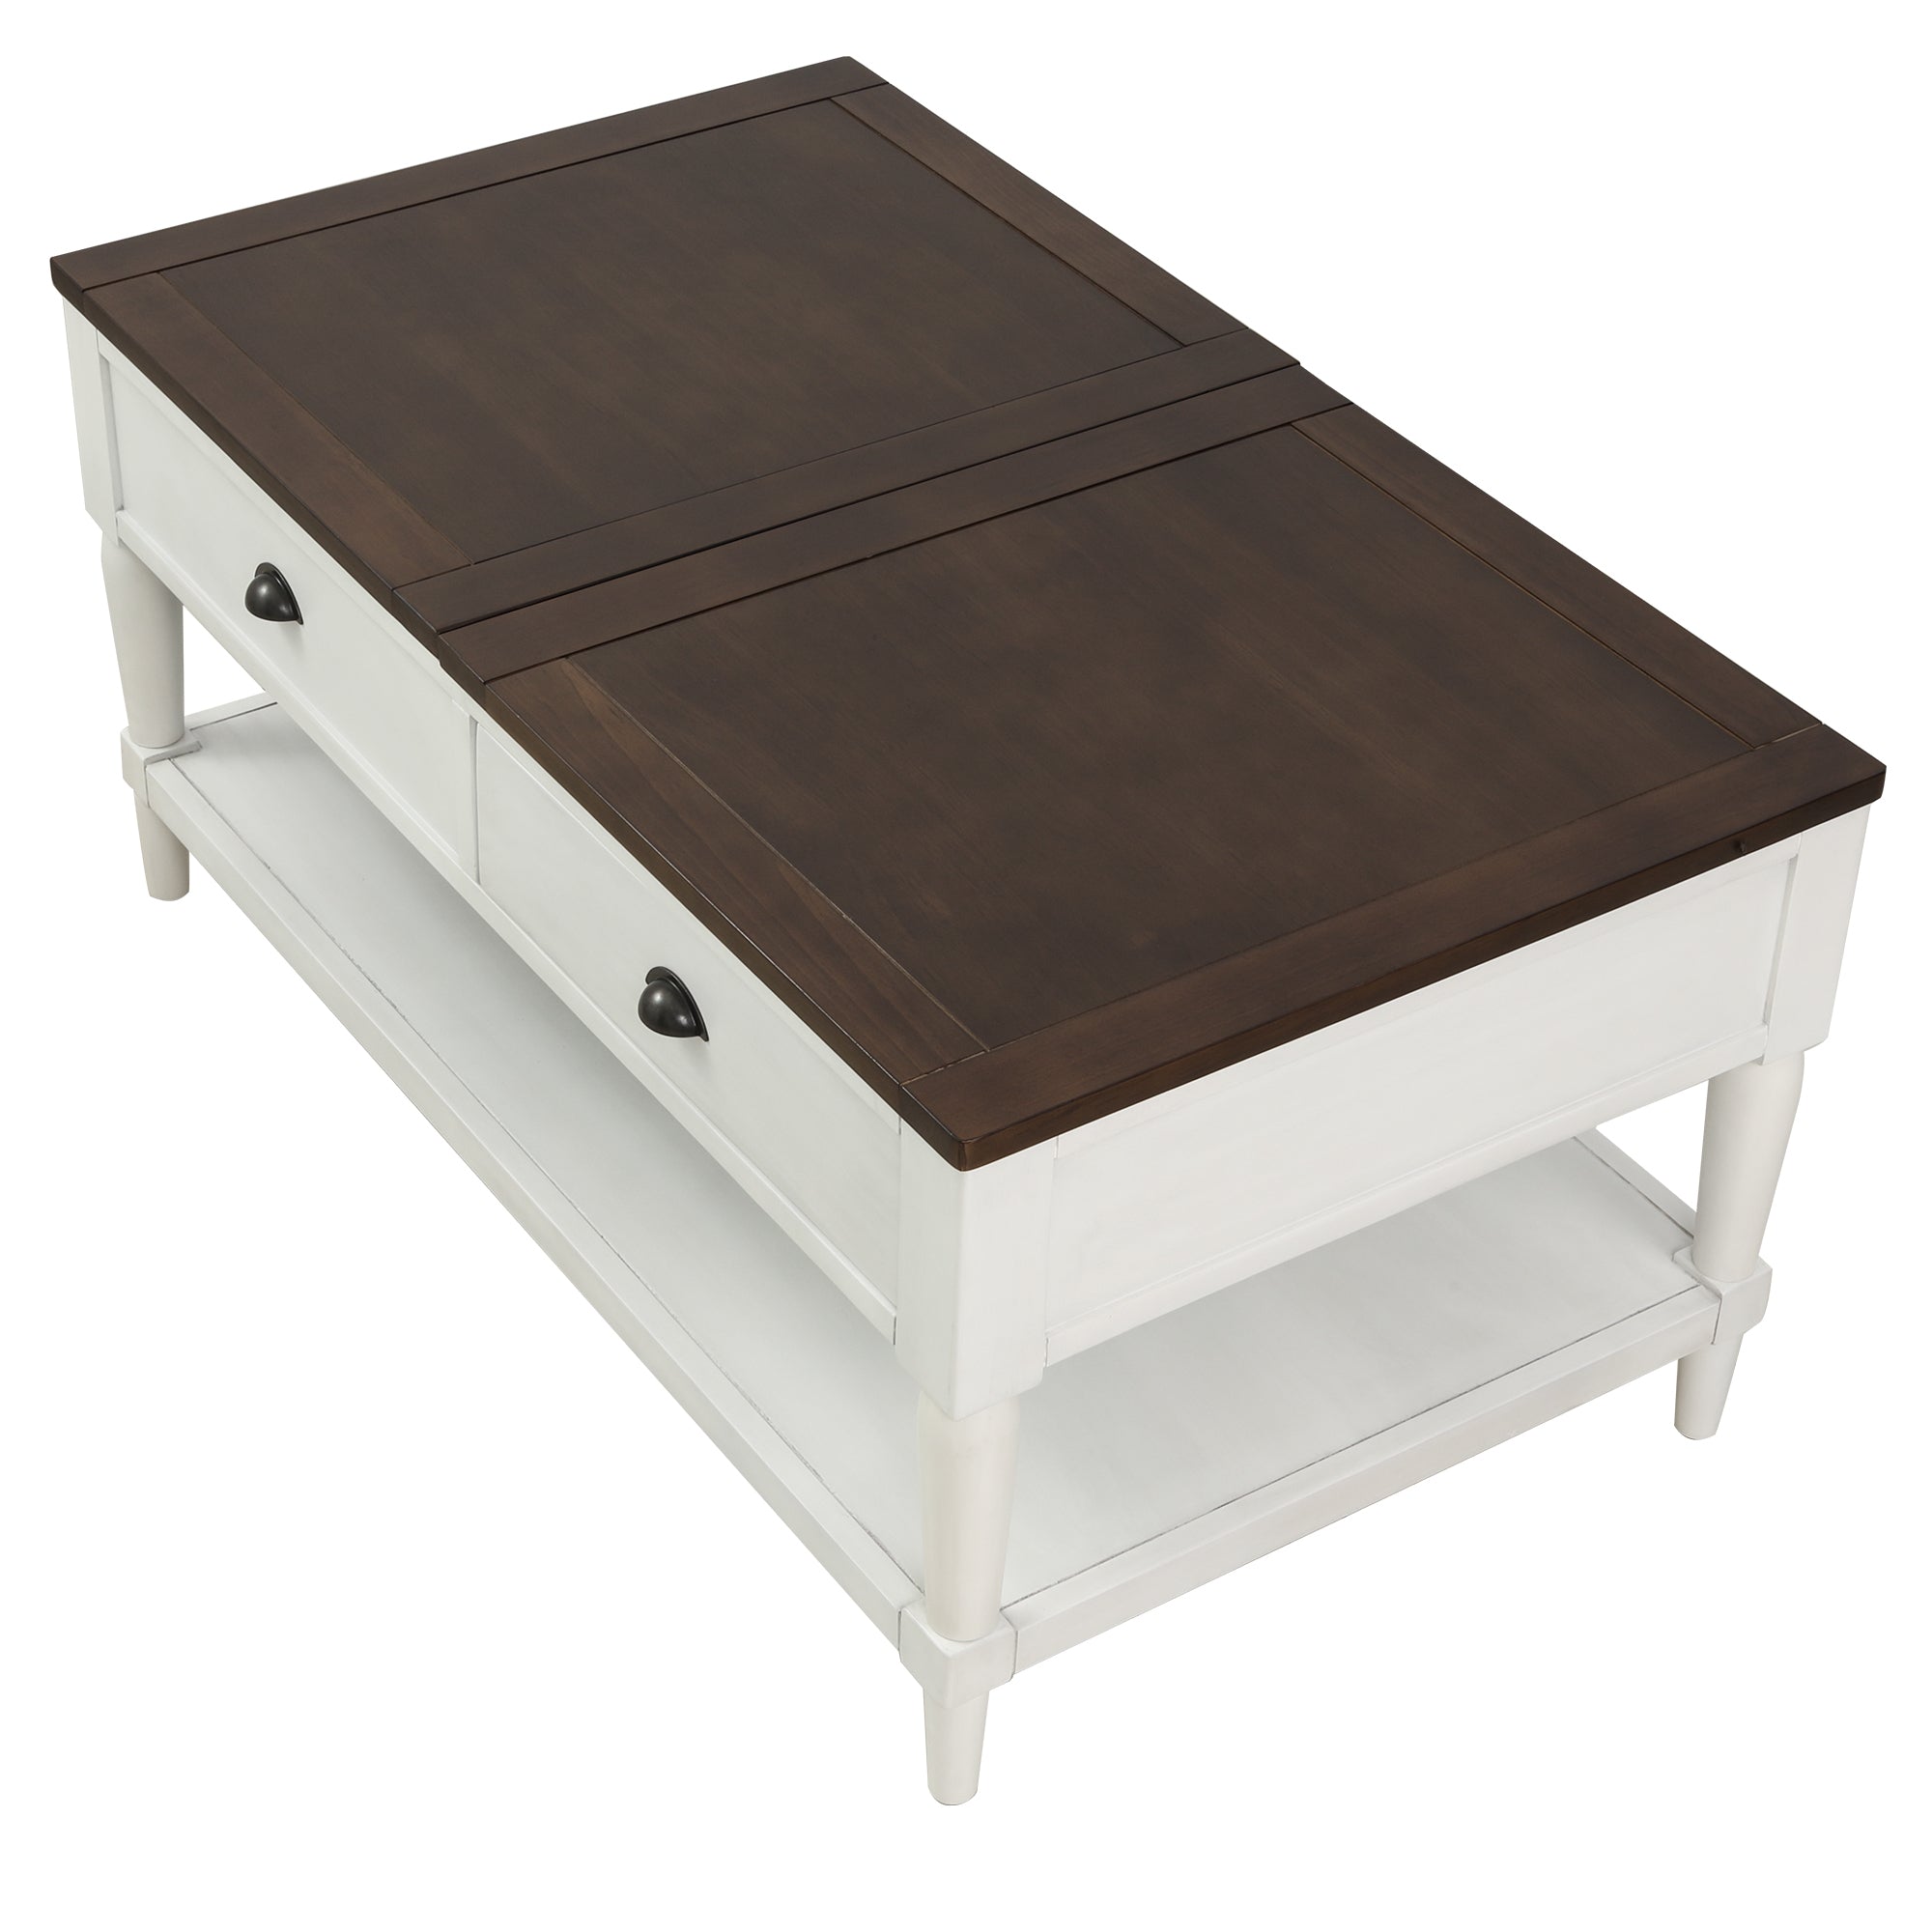 Coffee Table Lift Top Wood Home Living Room (White)